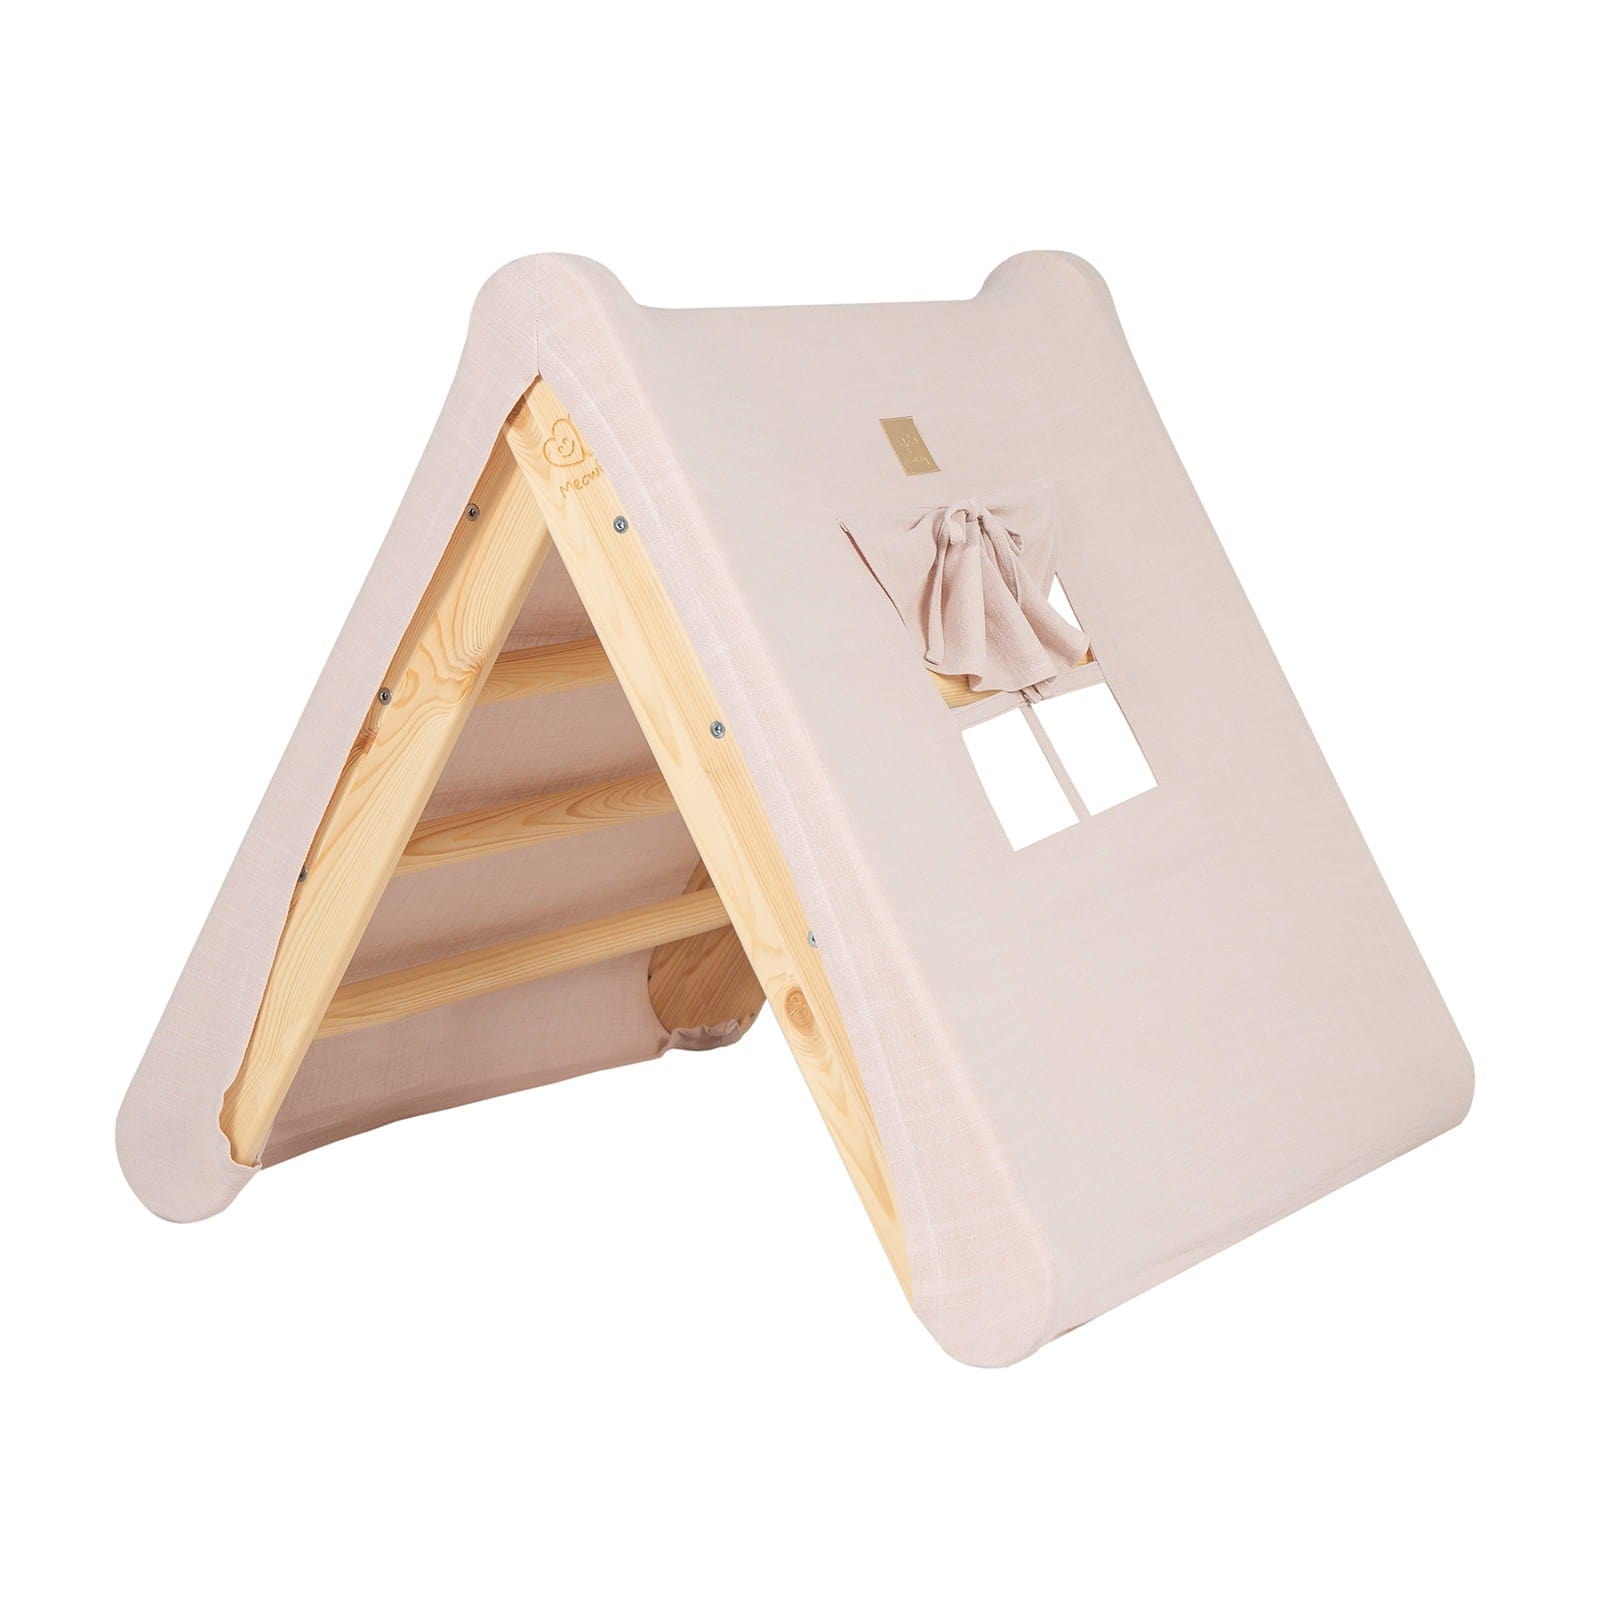 Folding Play House With Ladder For Kids By MeowBaby